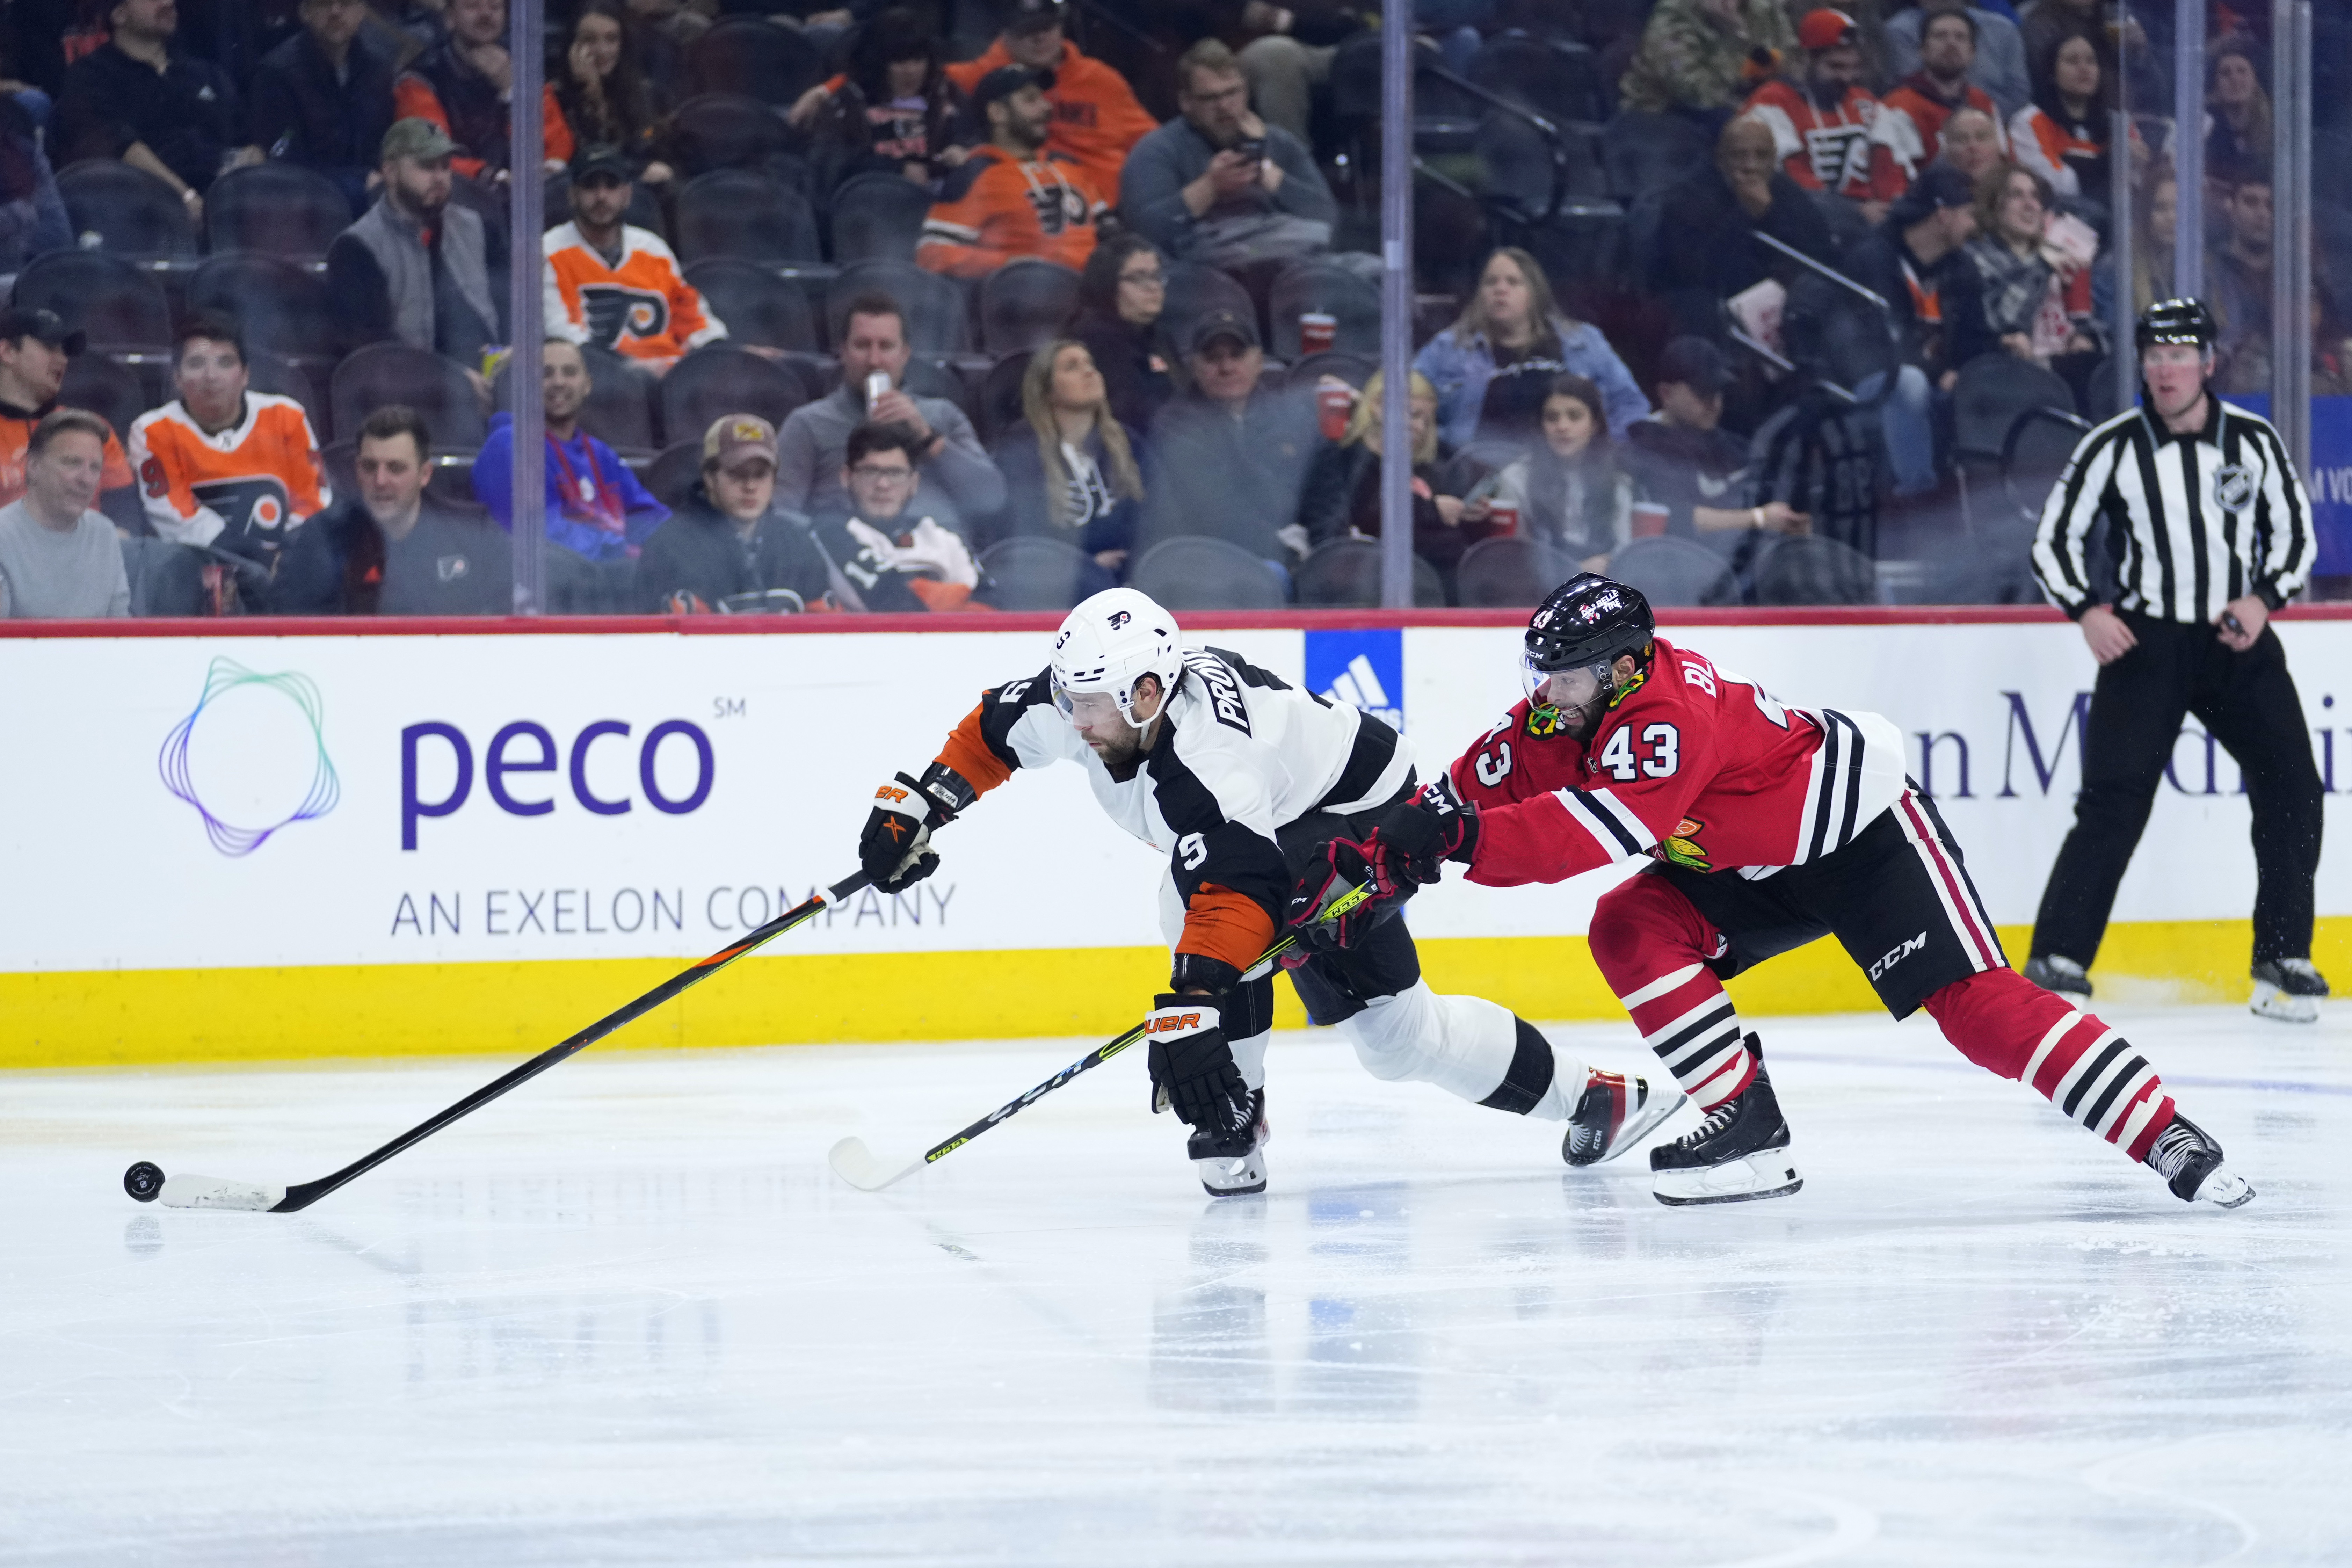 My choice is to stay true to myself': Flyers' Provorov cites